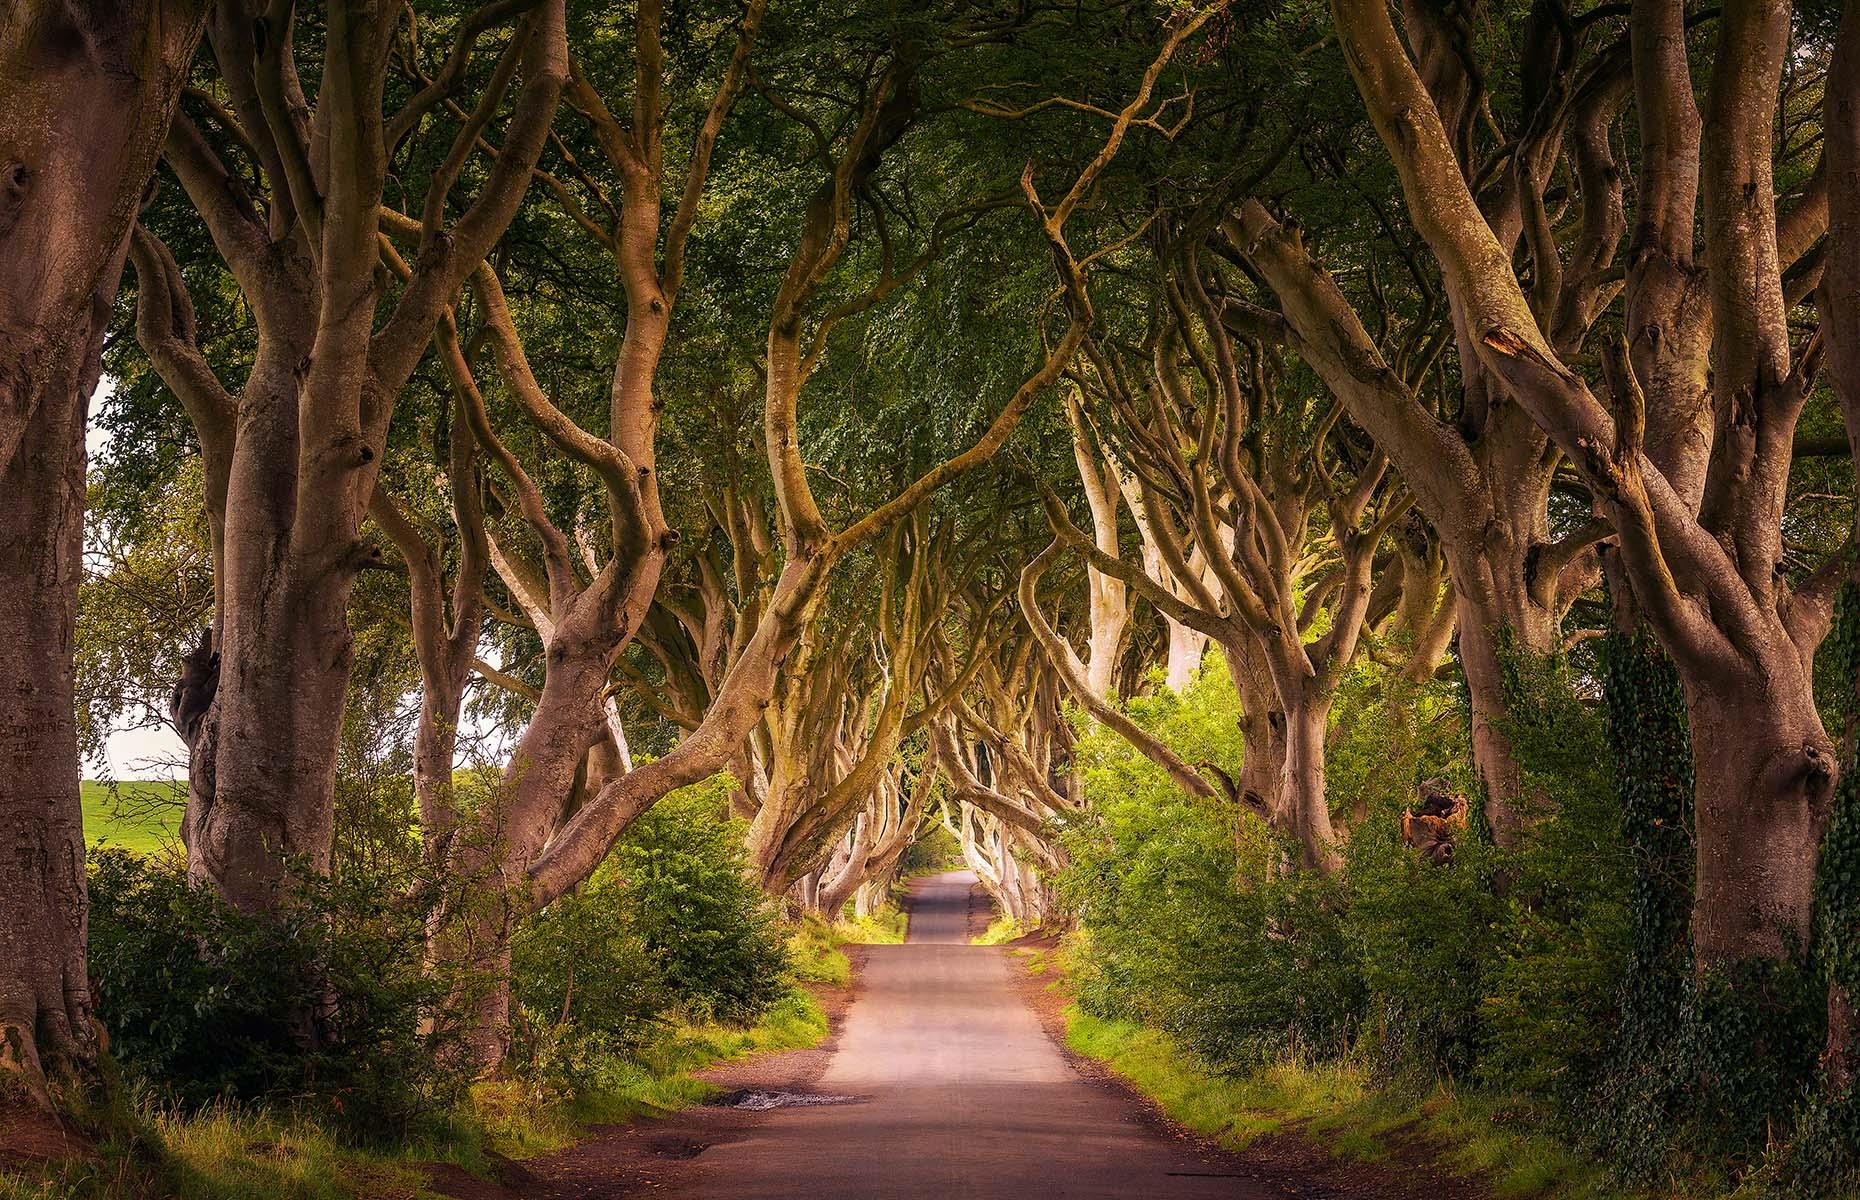 <p>Often regarded as one of the most enchanting places in Northern Ireland, this mythical tunnel of beech trees looks like a doorway into another world. Originally planted by the Stuart family in the 18th century as an impressive entrance for their Georgian mansion, today the trees are one of the country’s most-photographed natural wonders. Avid fans of the HBO series <em>Game of Thrones</em> may recognise The Dark Hedges as the location for the Kingsroad.</p>